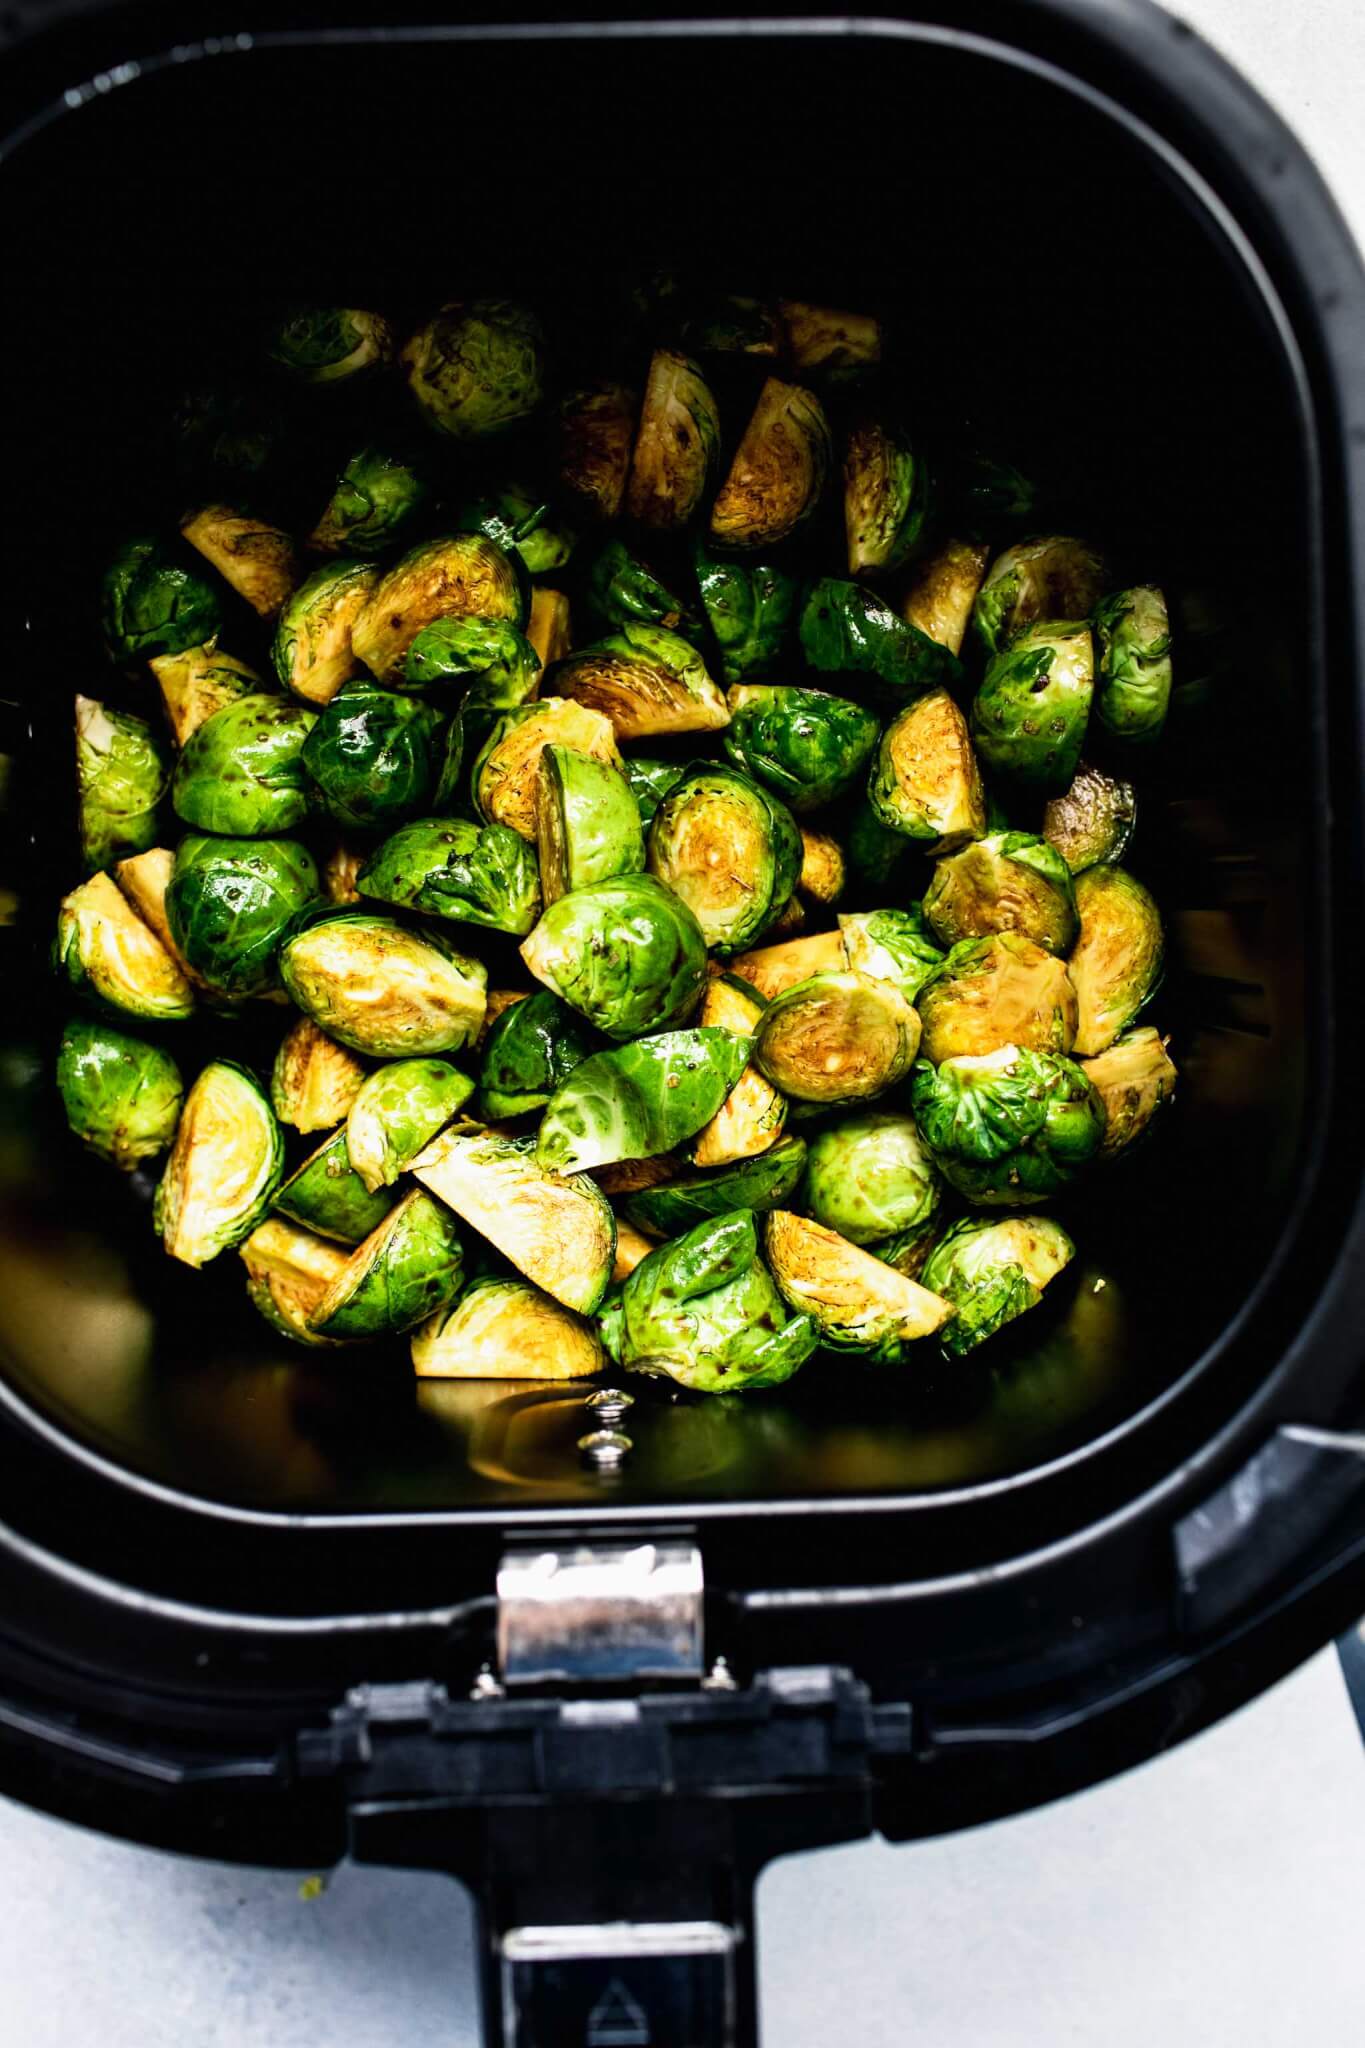 Uncooked brussels sprouts in air fryer basket.